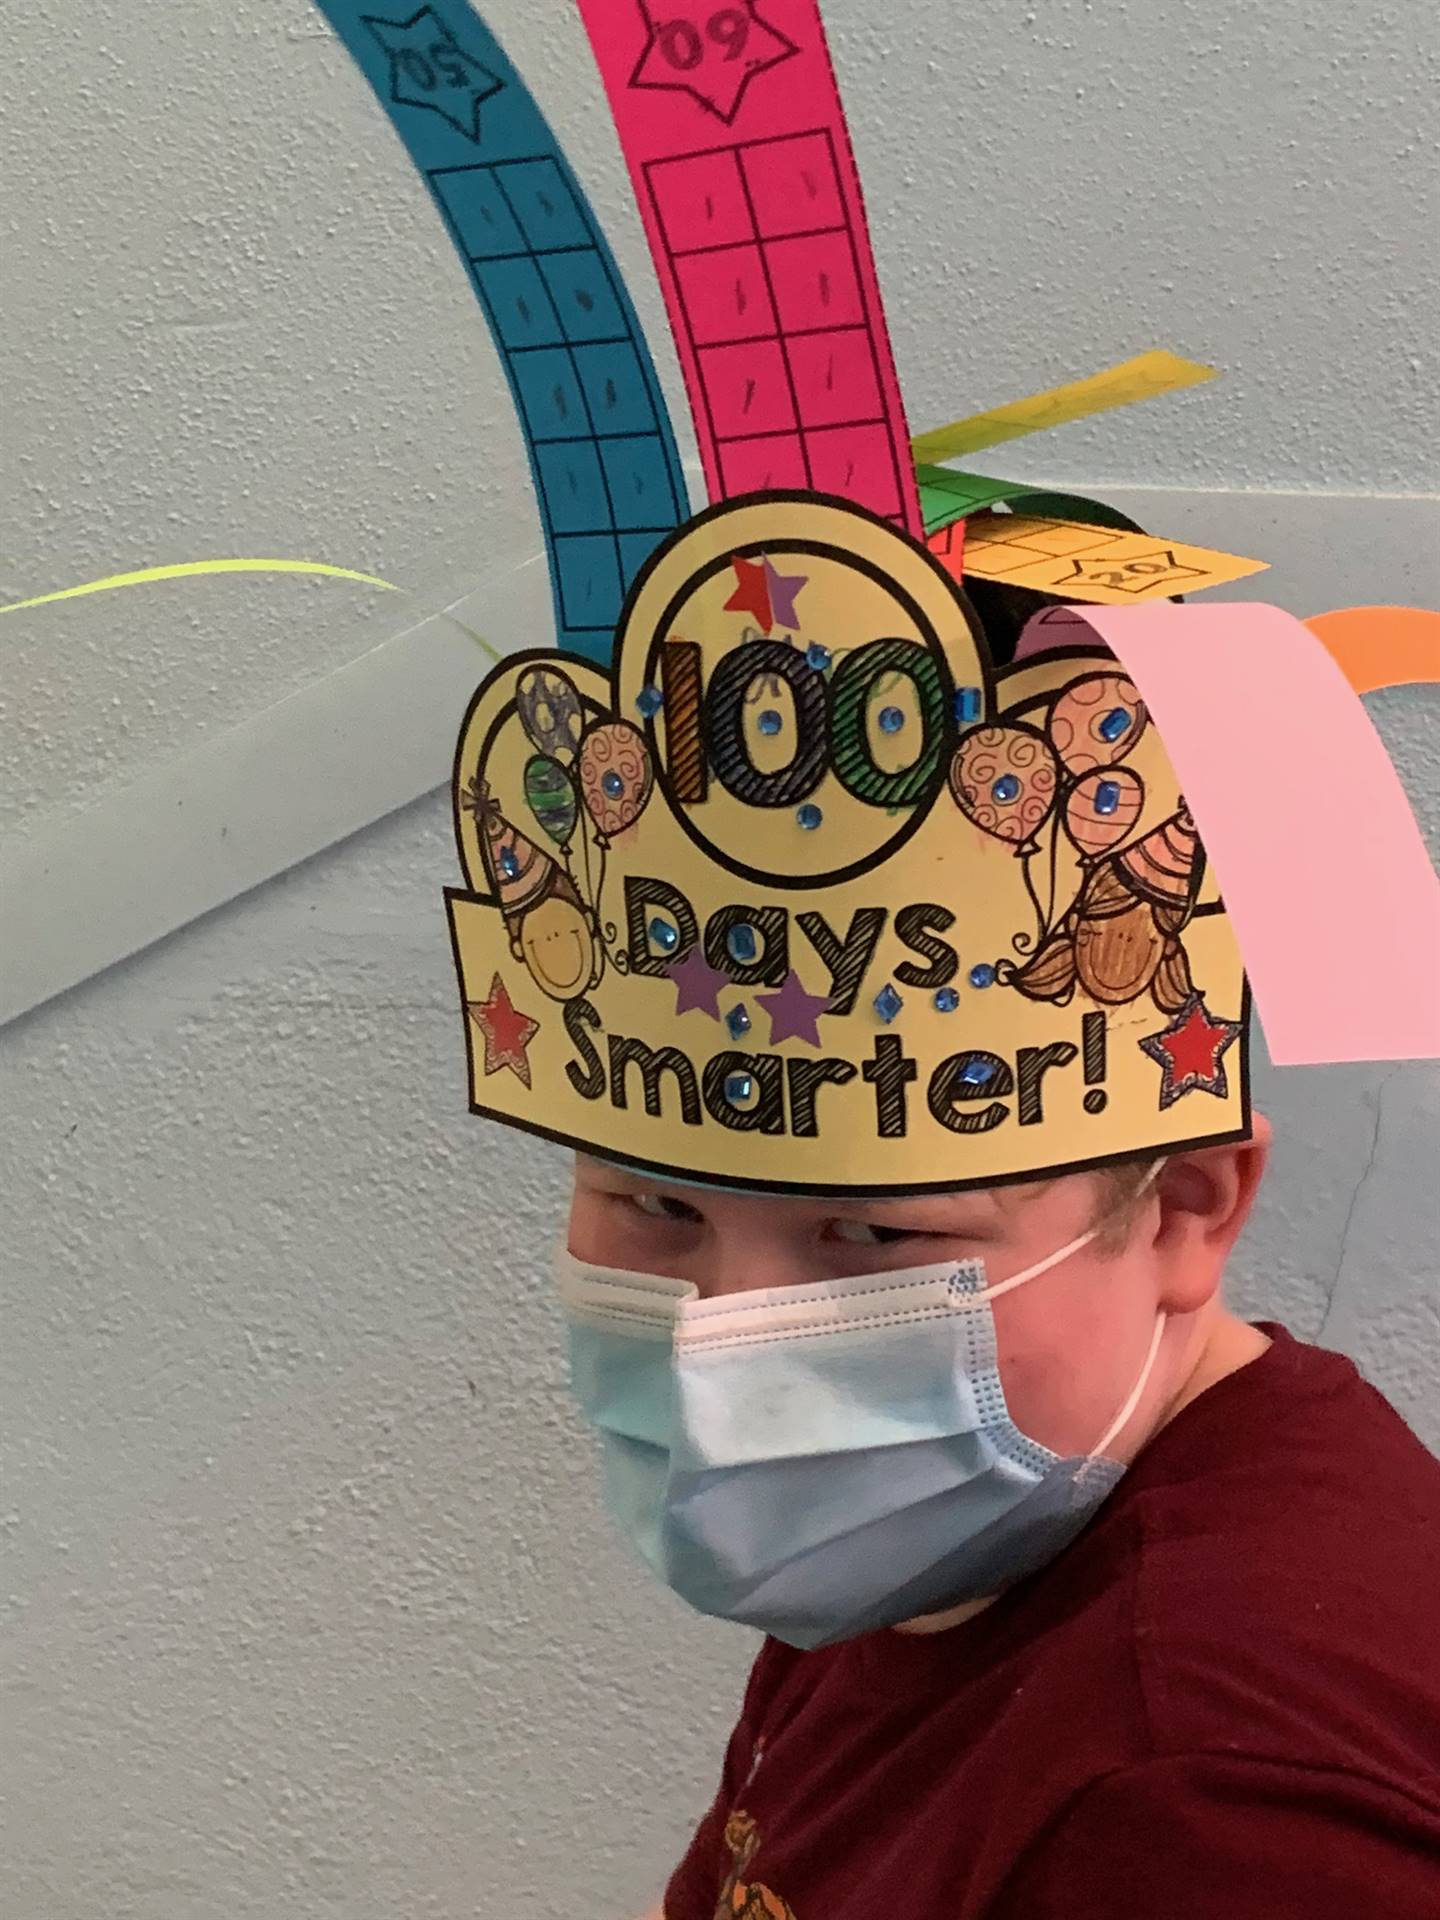 student with 100 days smarter hat.